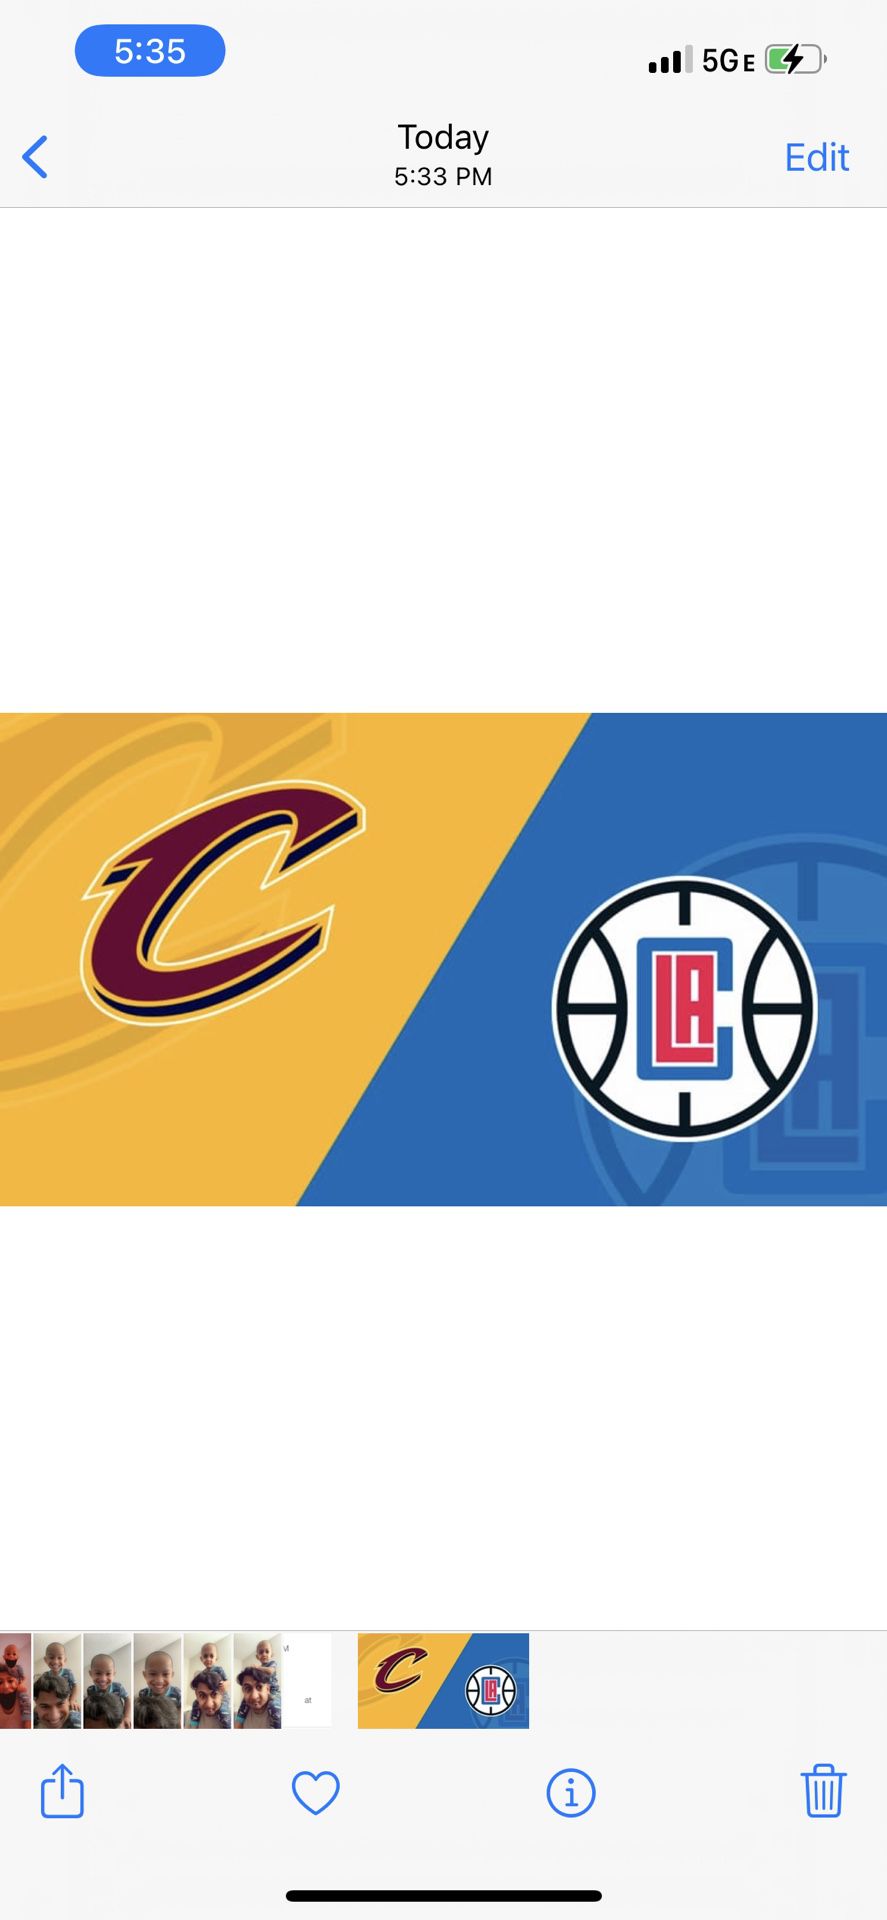  2 CAVALIERS VS CLIPPERS TICKETS